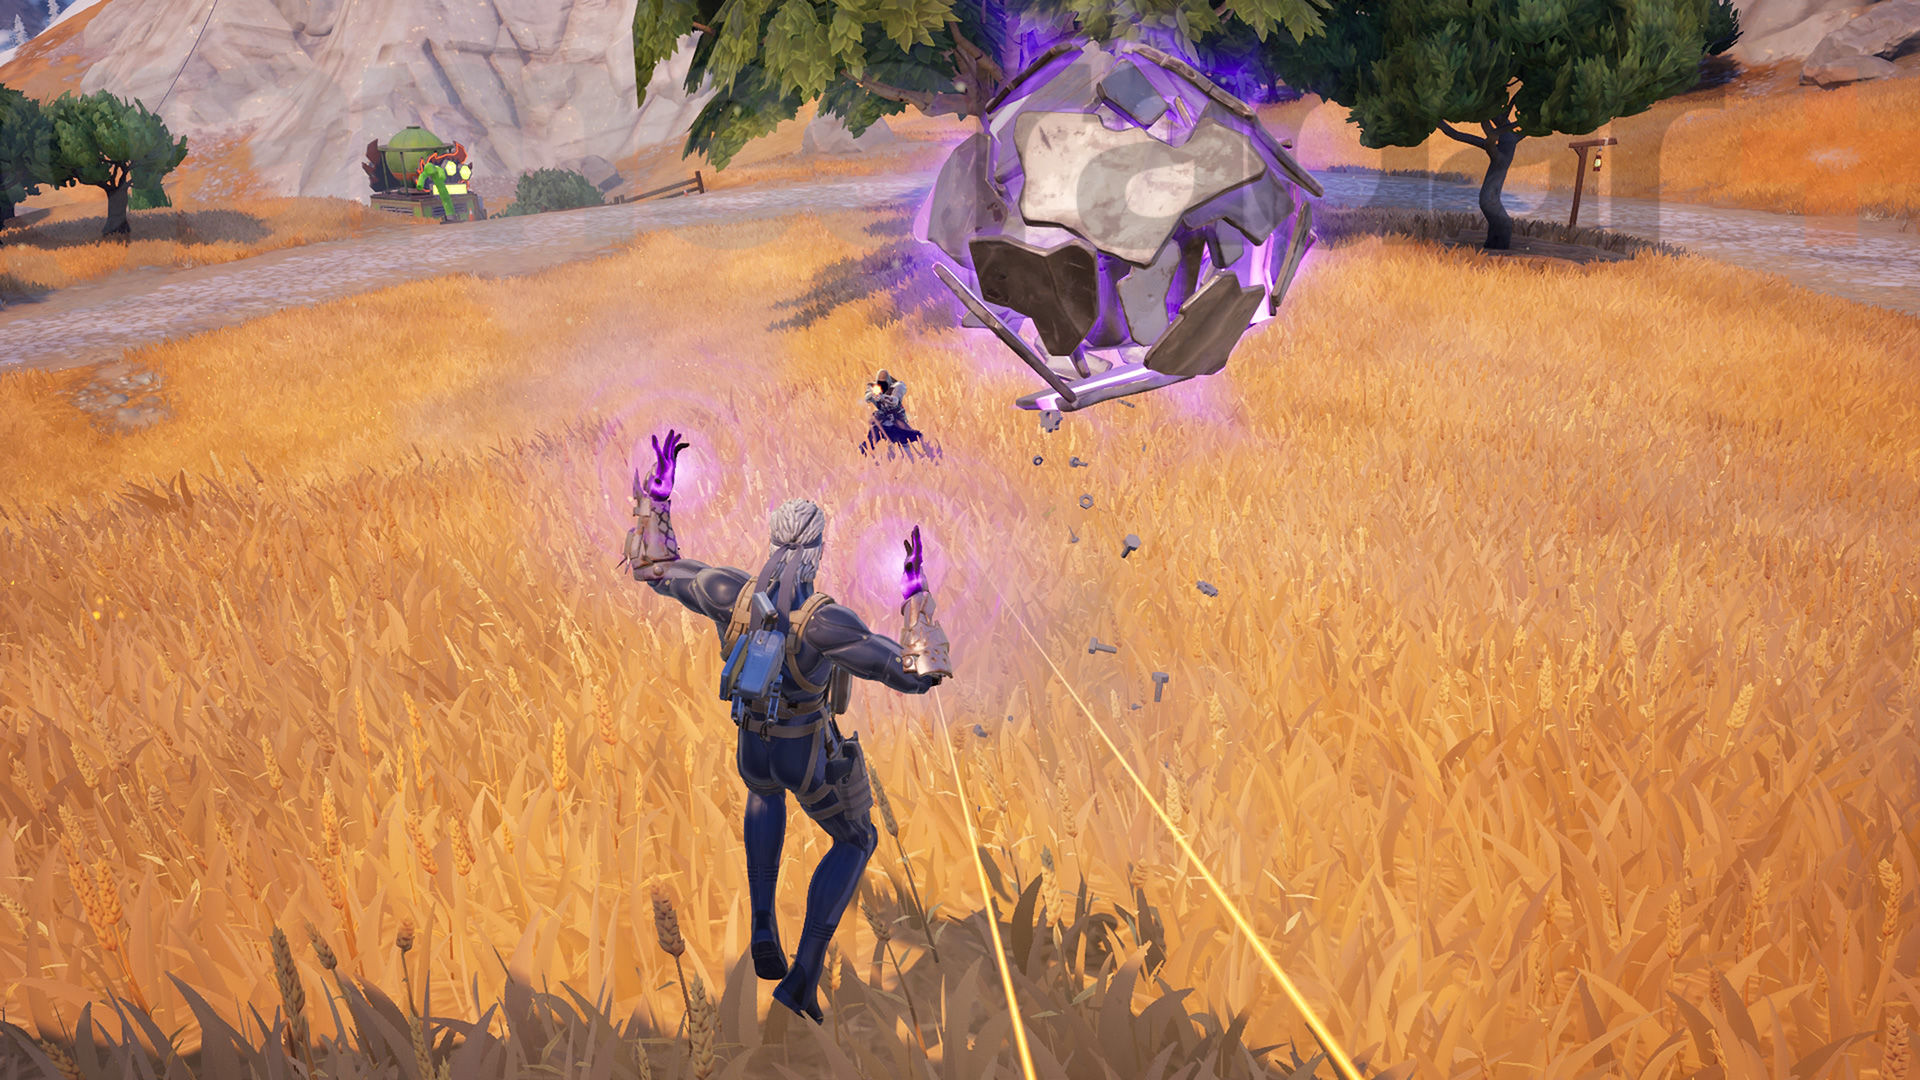 Using Fortnite Magneto Power to damage an opponent